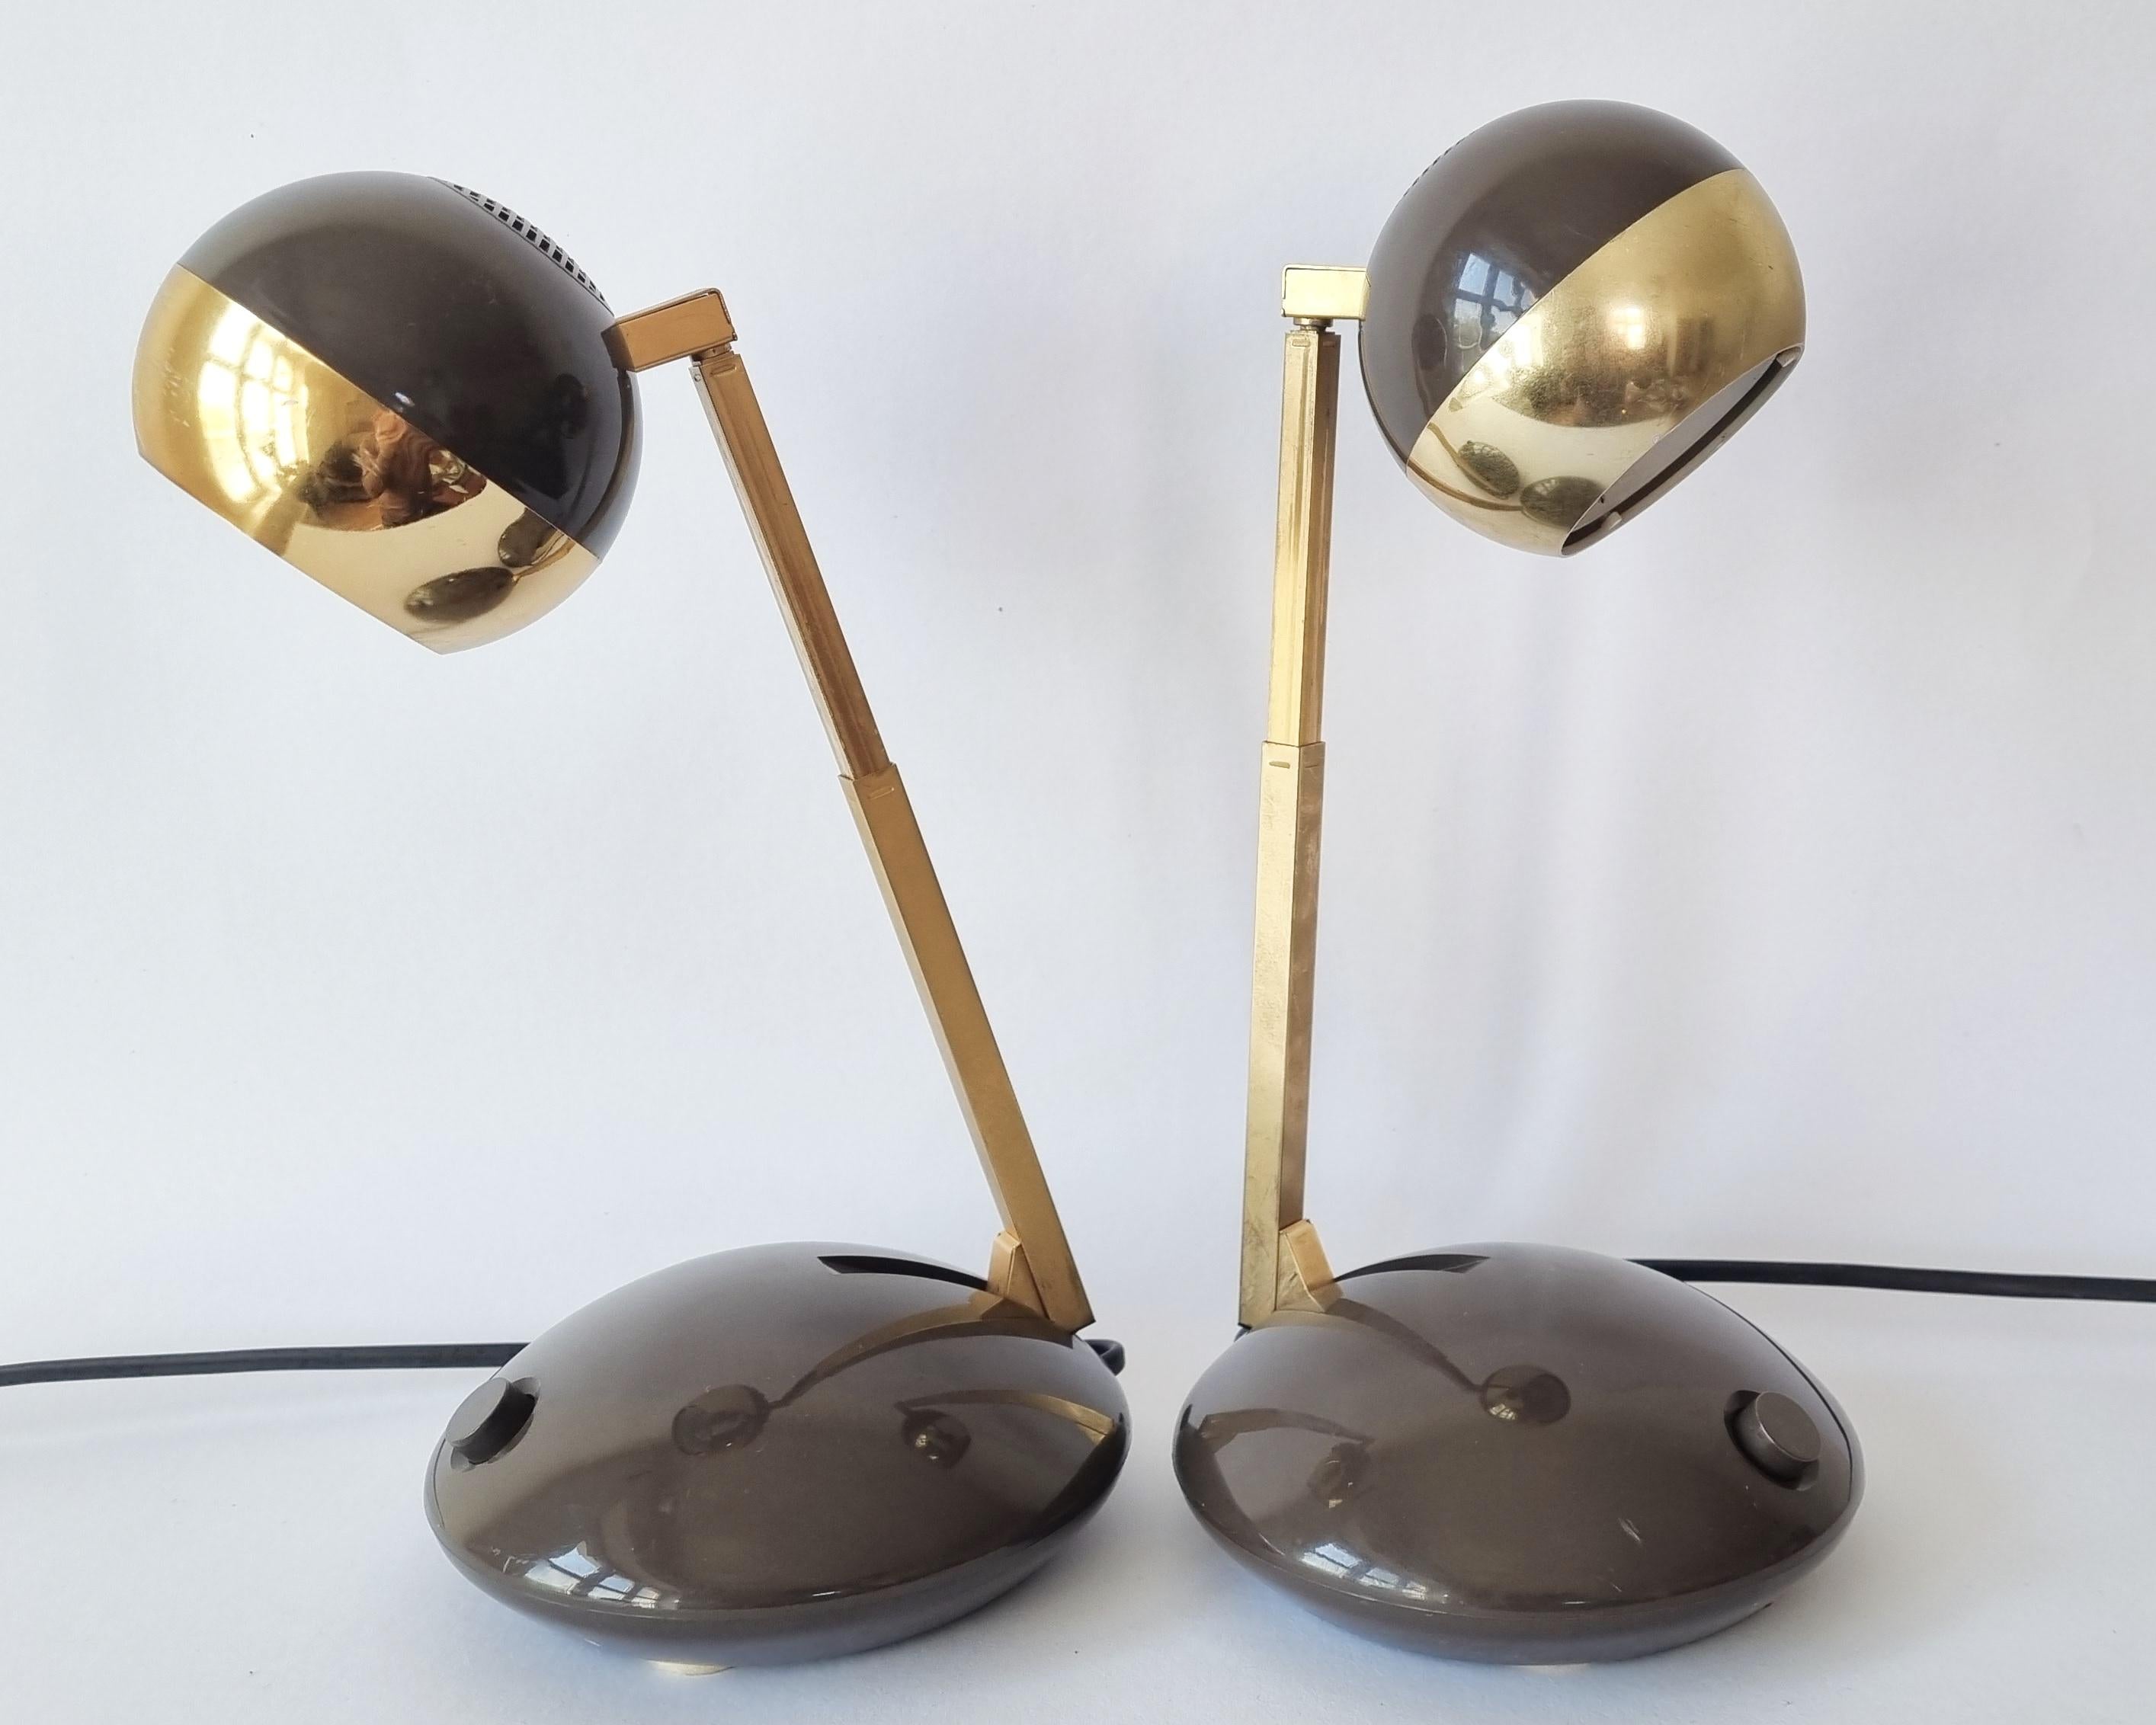 Pair of Midcentury Telescope Table Lamps Eichhoff Werke, Germany, 1970s For Sale 2